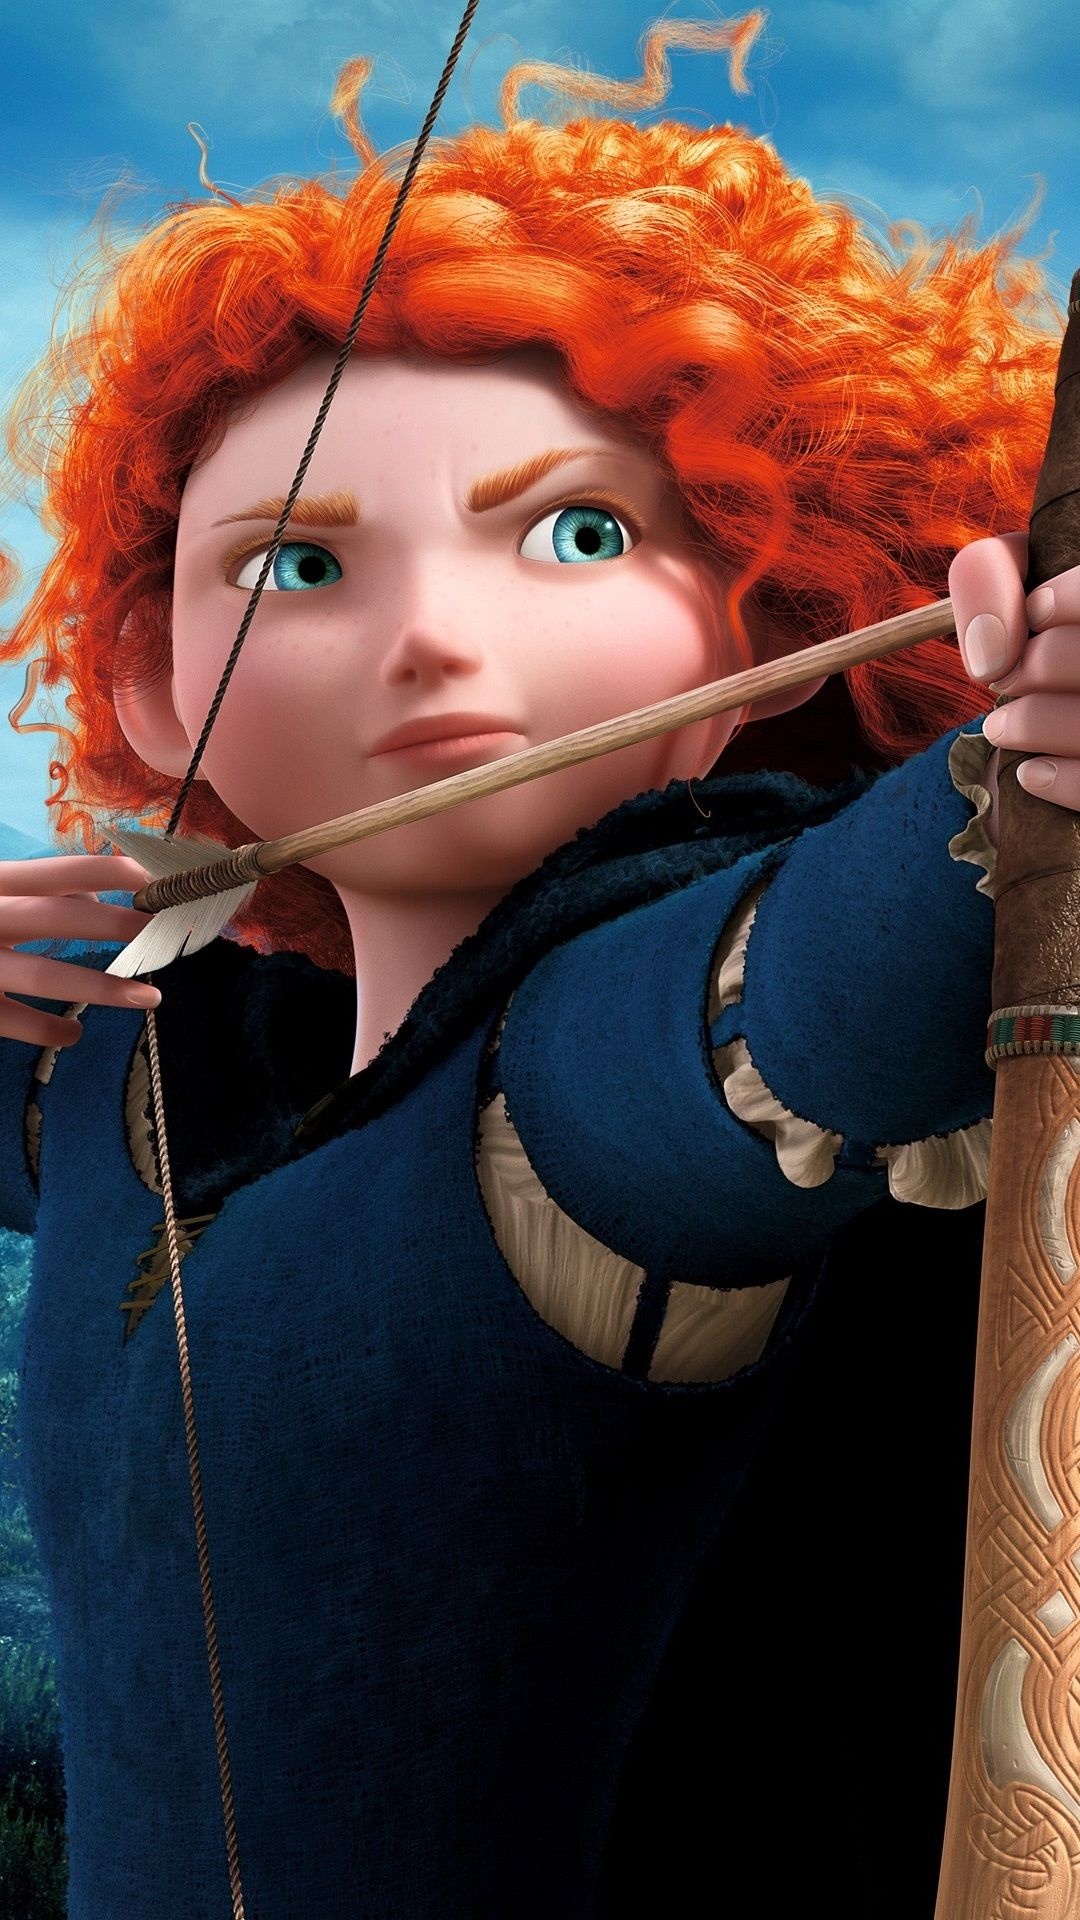 Brave iPhone wallpapers, Princess Merida, Animated movie, Epic landscapes, 1080x1920 Full HD Handy